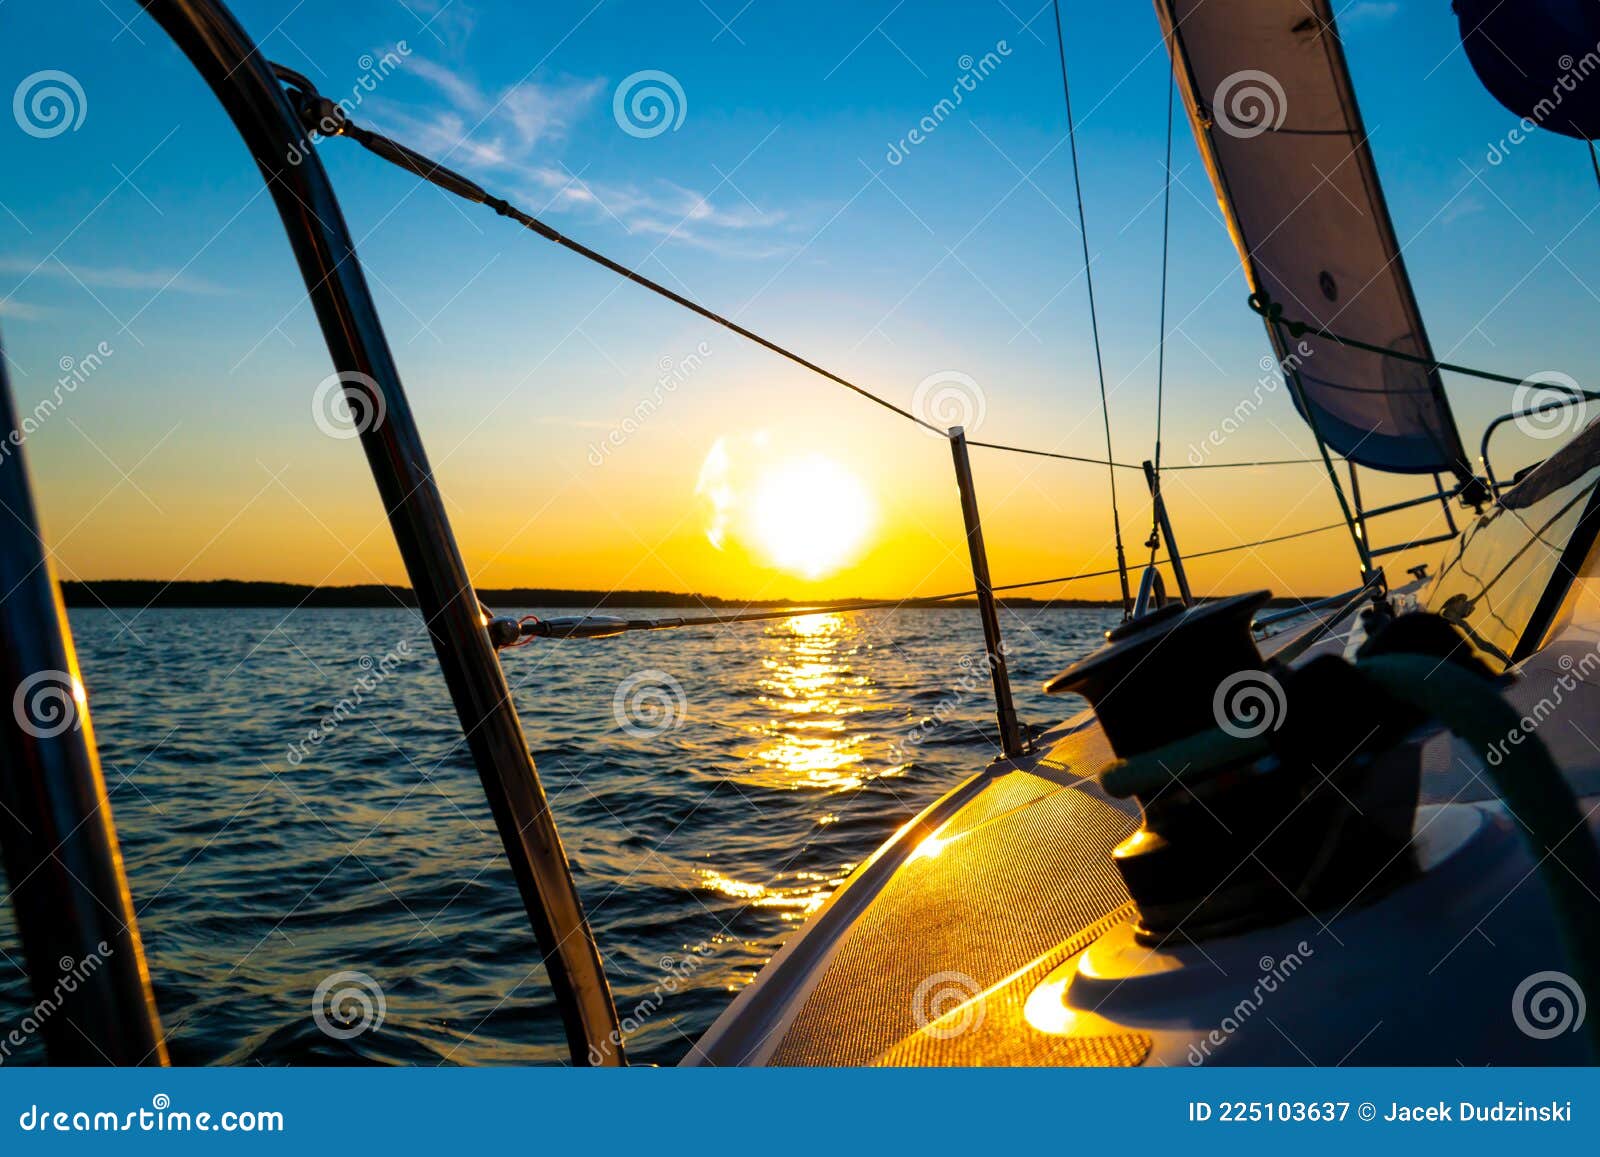 romantic cruise onboard of sailling boat, luxury yacht, beautiful seascape background